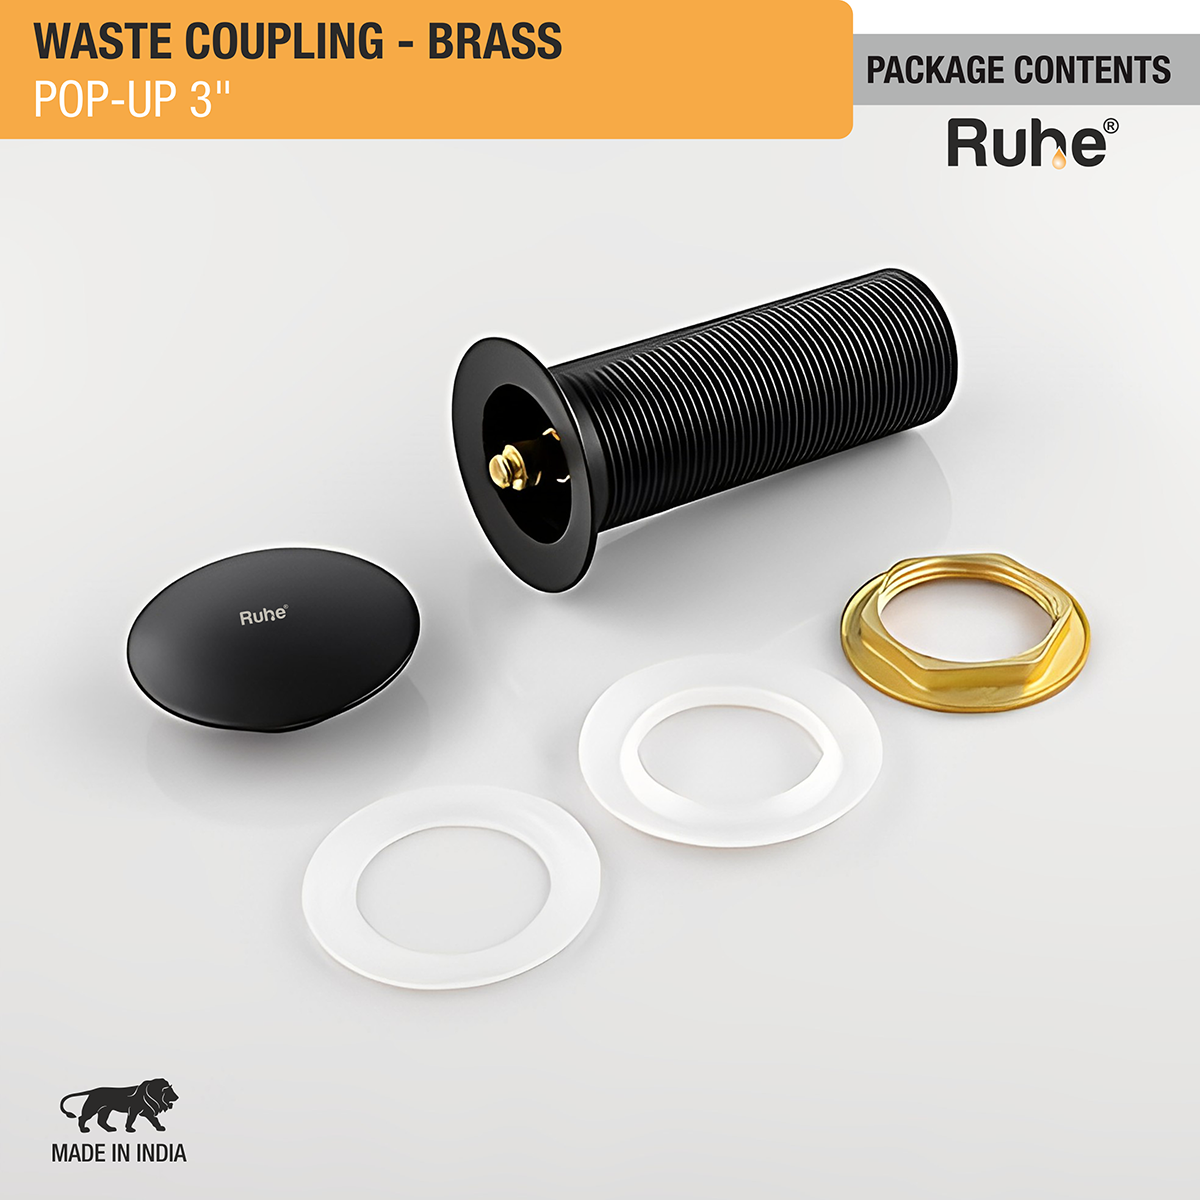 Pop-up Waste Coupling in Matte Black PVD Coating (3 Inches) package content